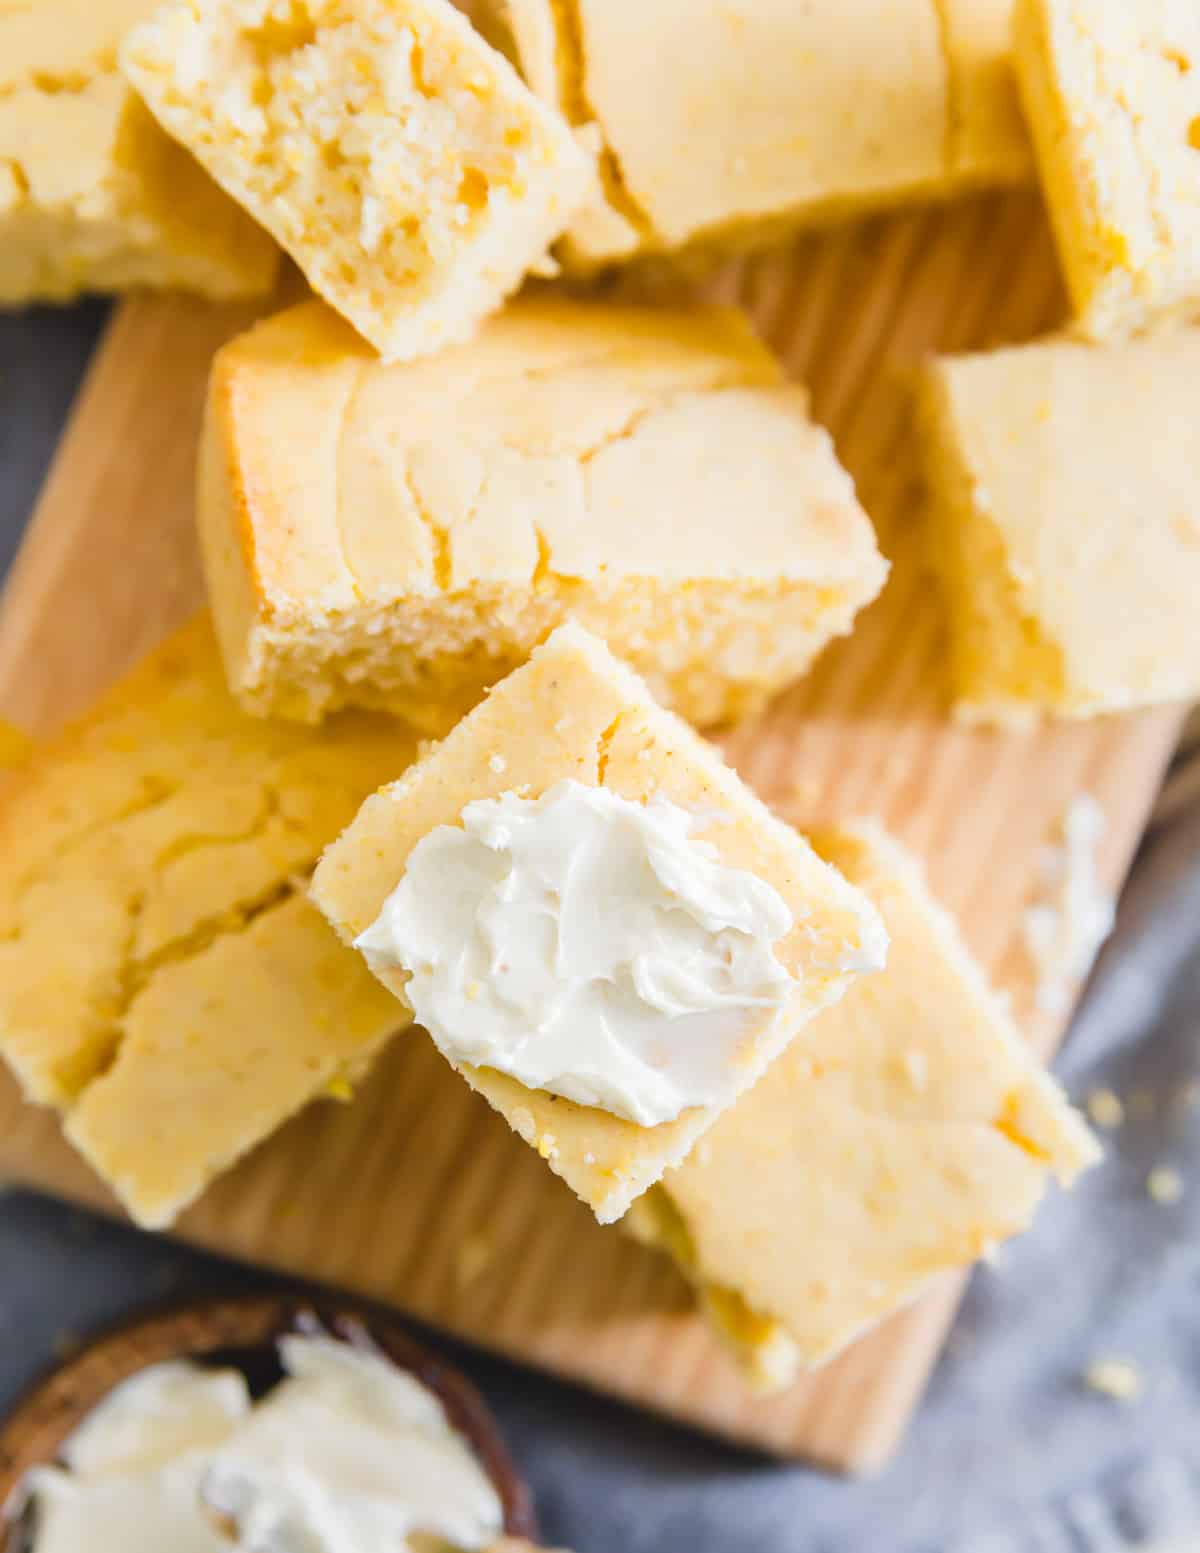 easy gluten-free vegan cornbread cut into pieces and served with softened butter